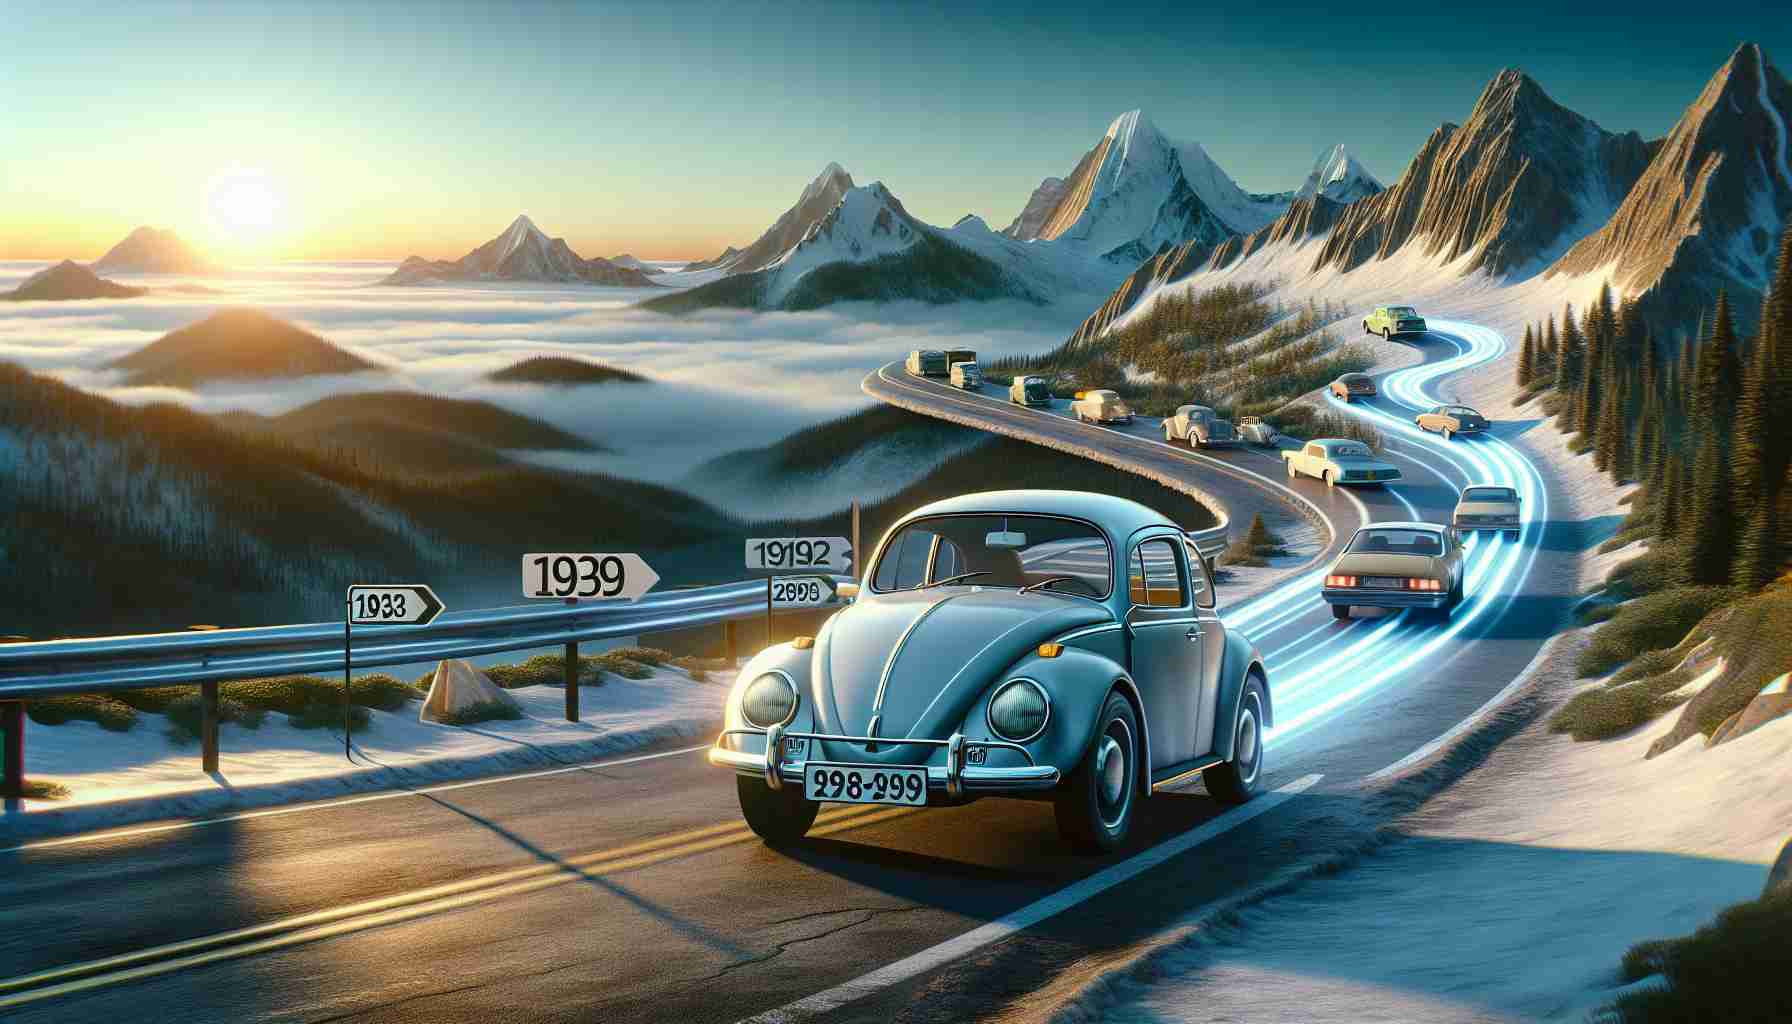 The Enduring Legacy of Volkswagen's Iconic Beetle Design